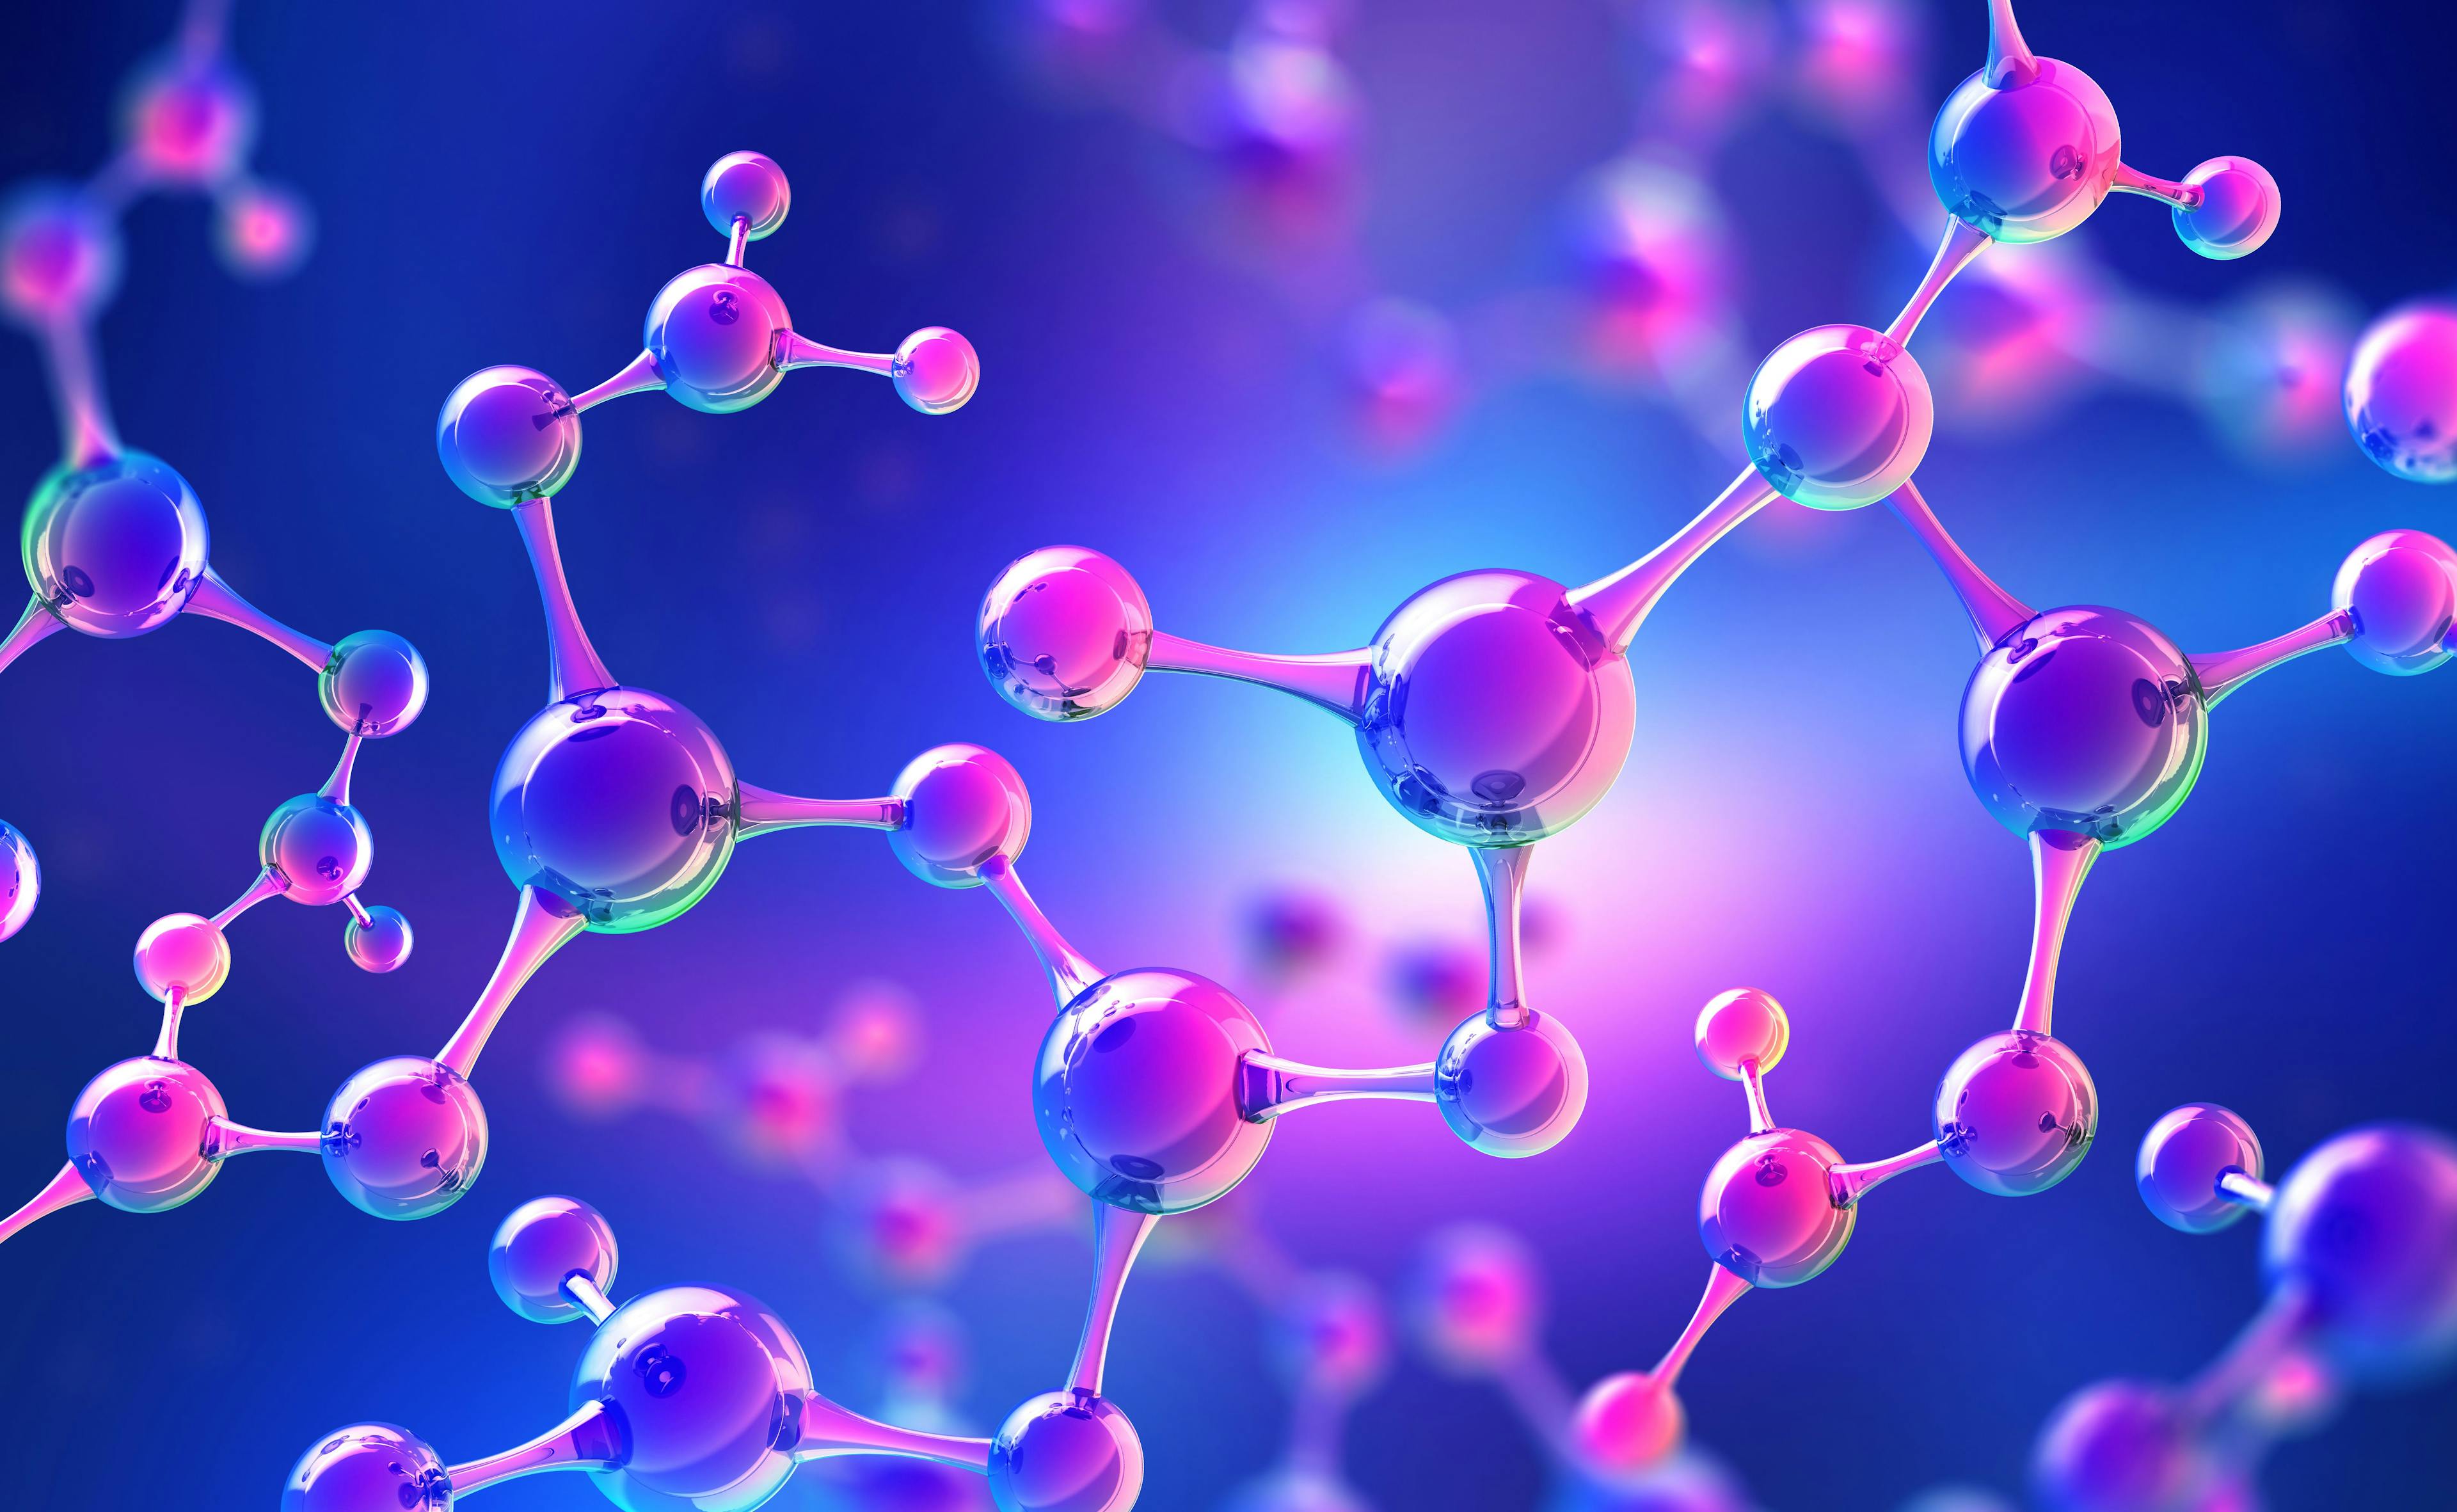 Abstract molecule model. Scientific research in molecular chemistry. 3D illustration on a pearl blue background | Image Credit: © Siarhei - stock.adobe.com